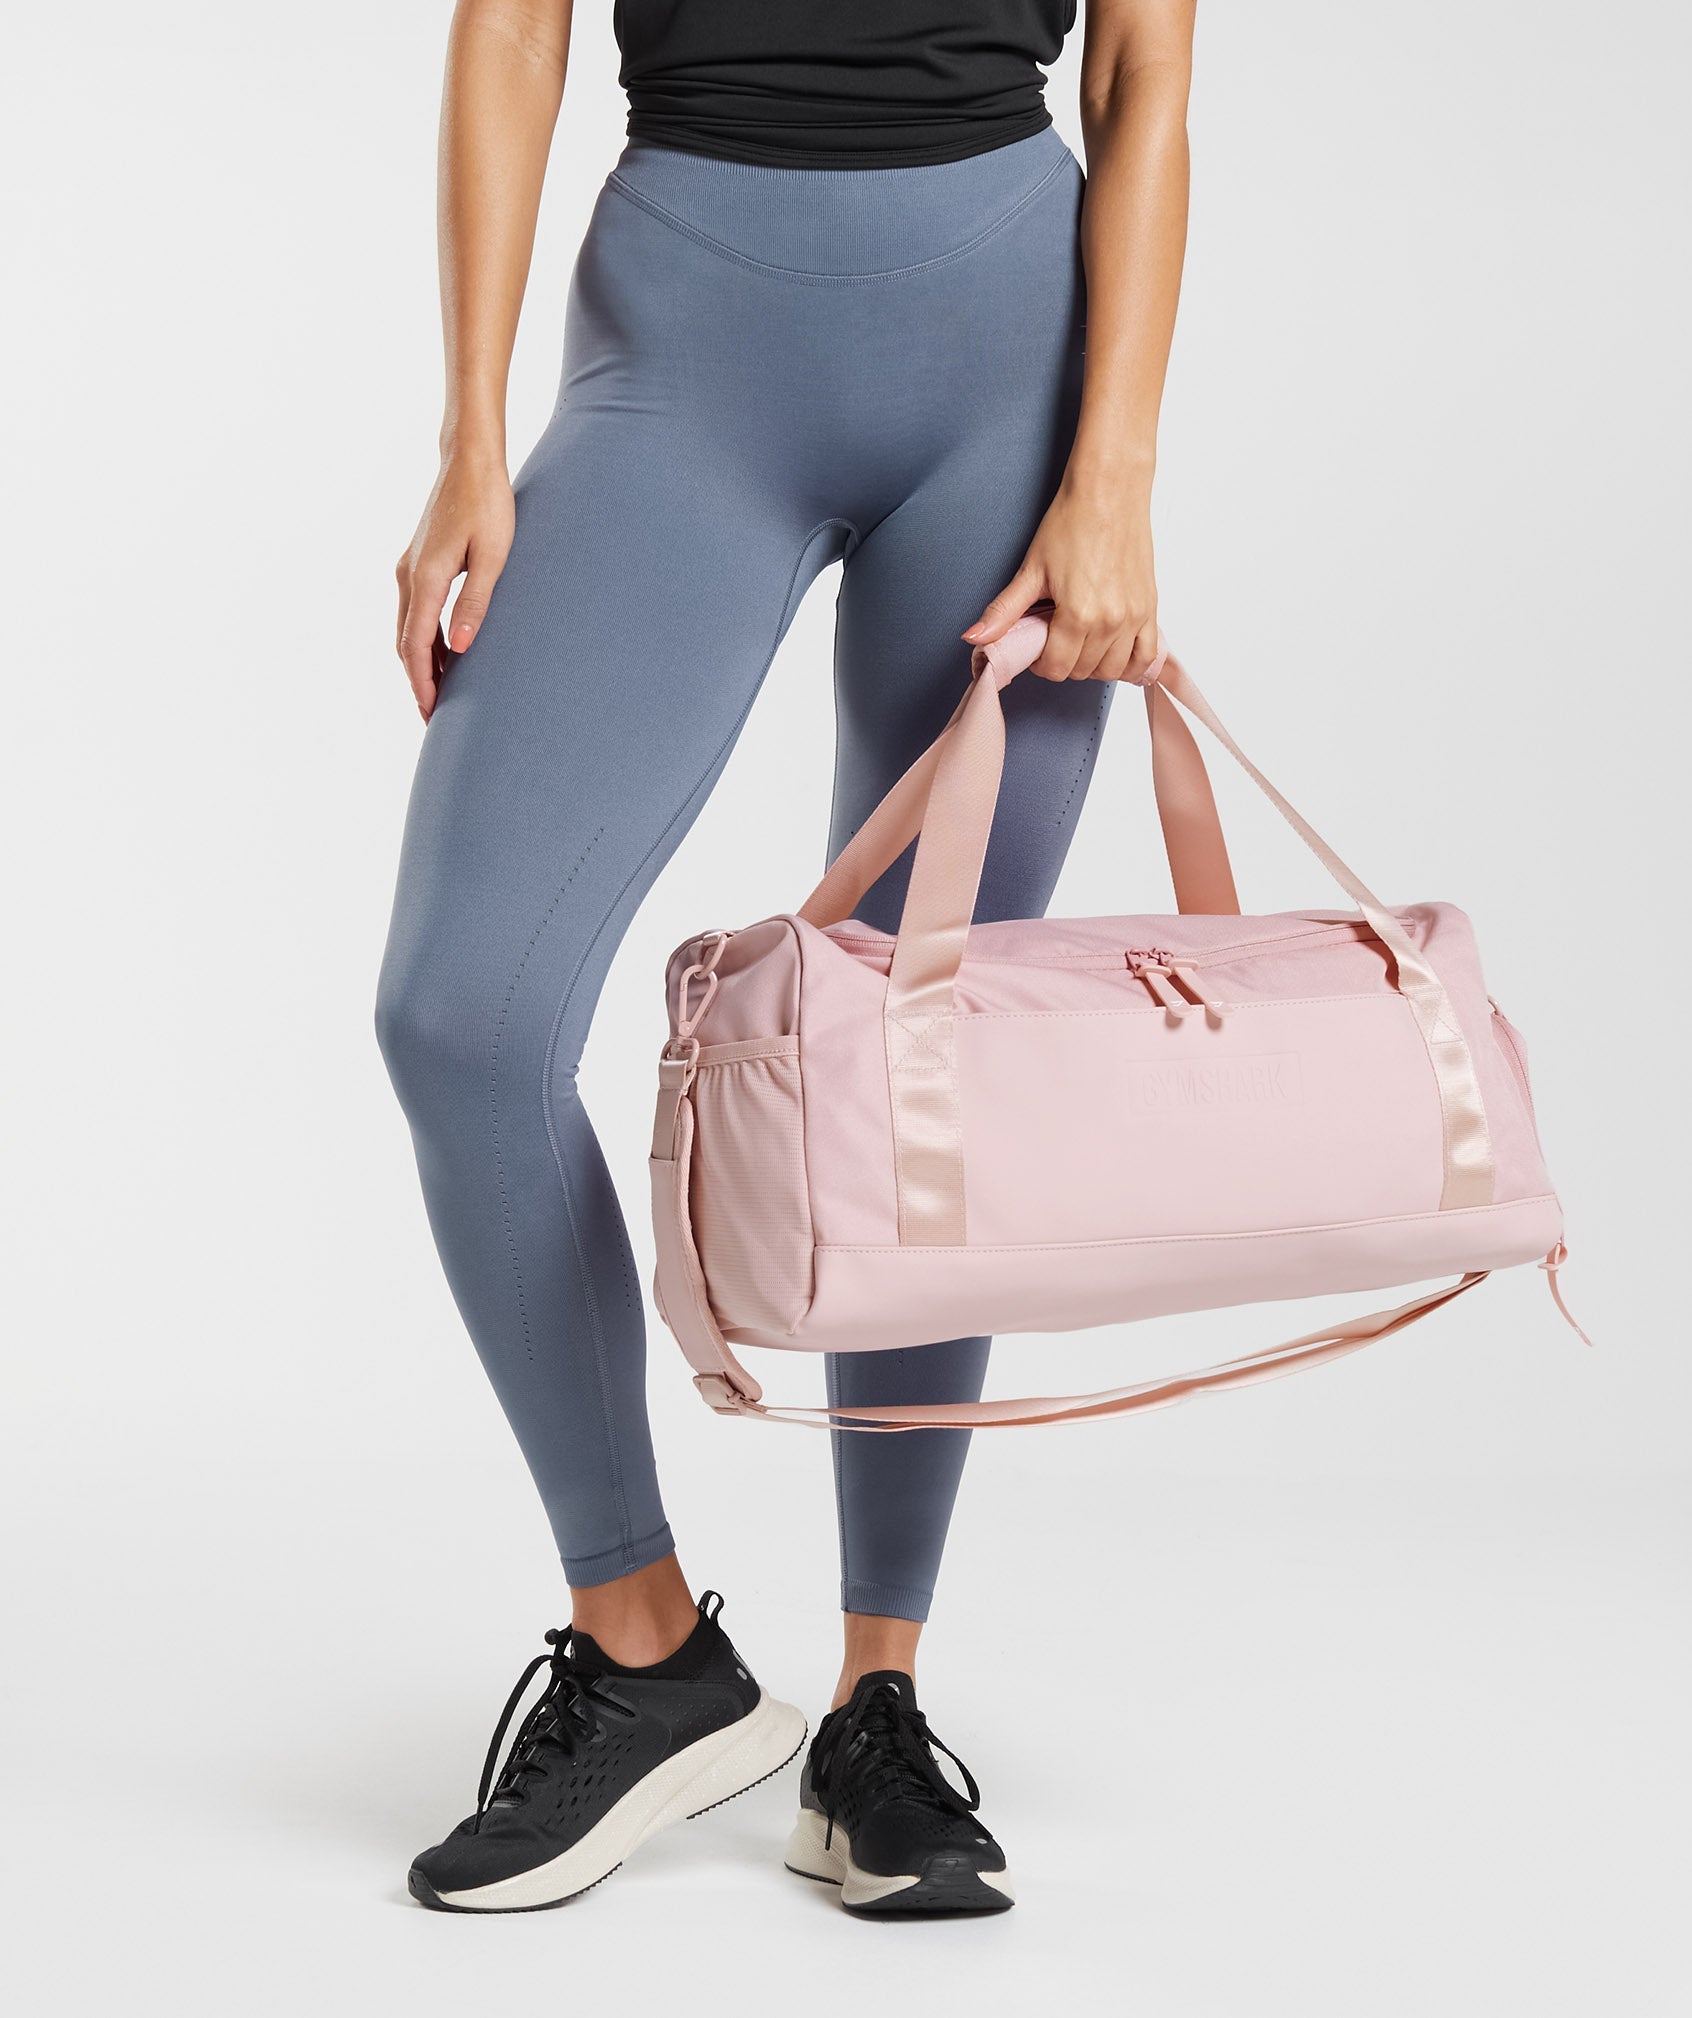 Small Everyday Gym Bag in Scandi Pink - view 2